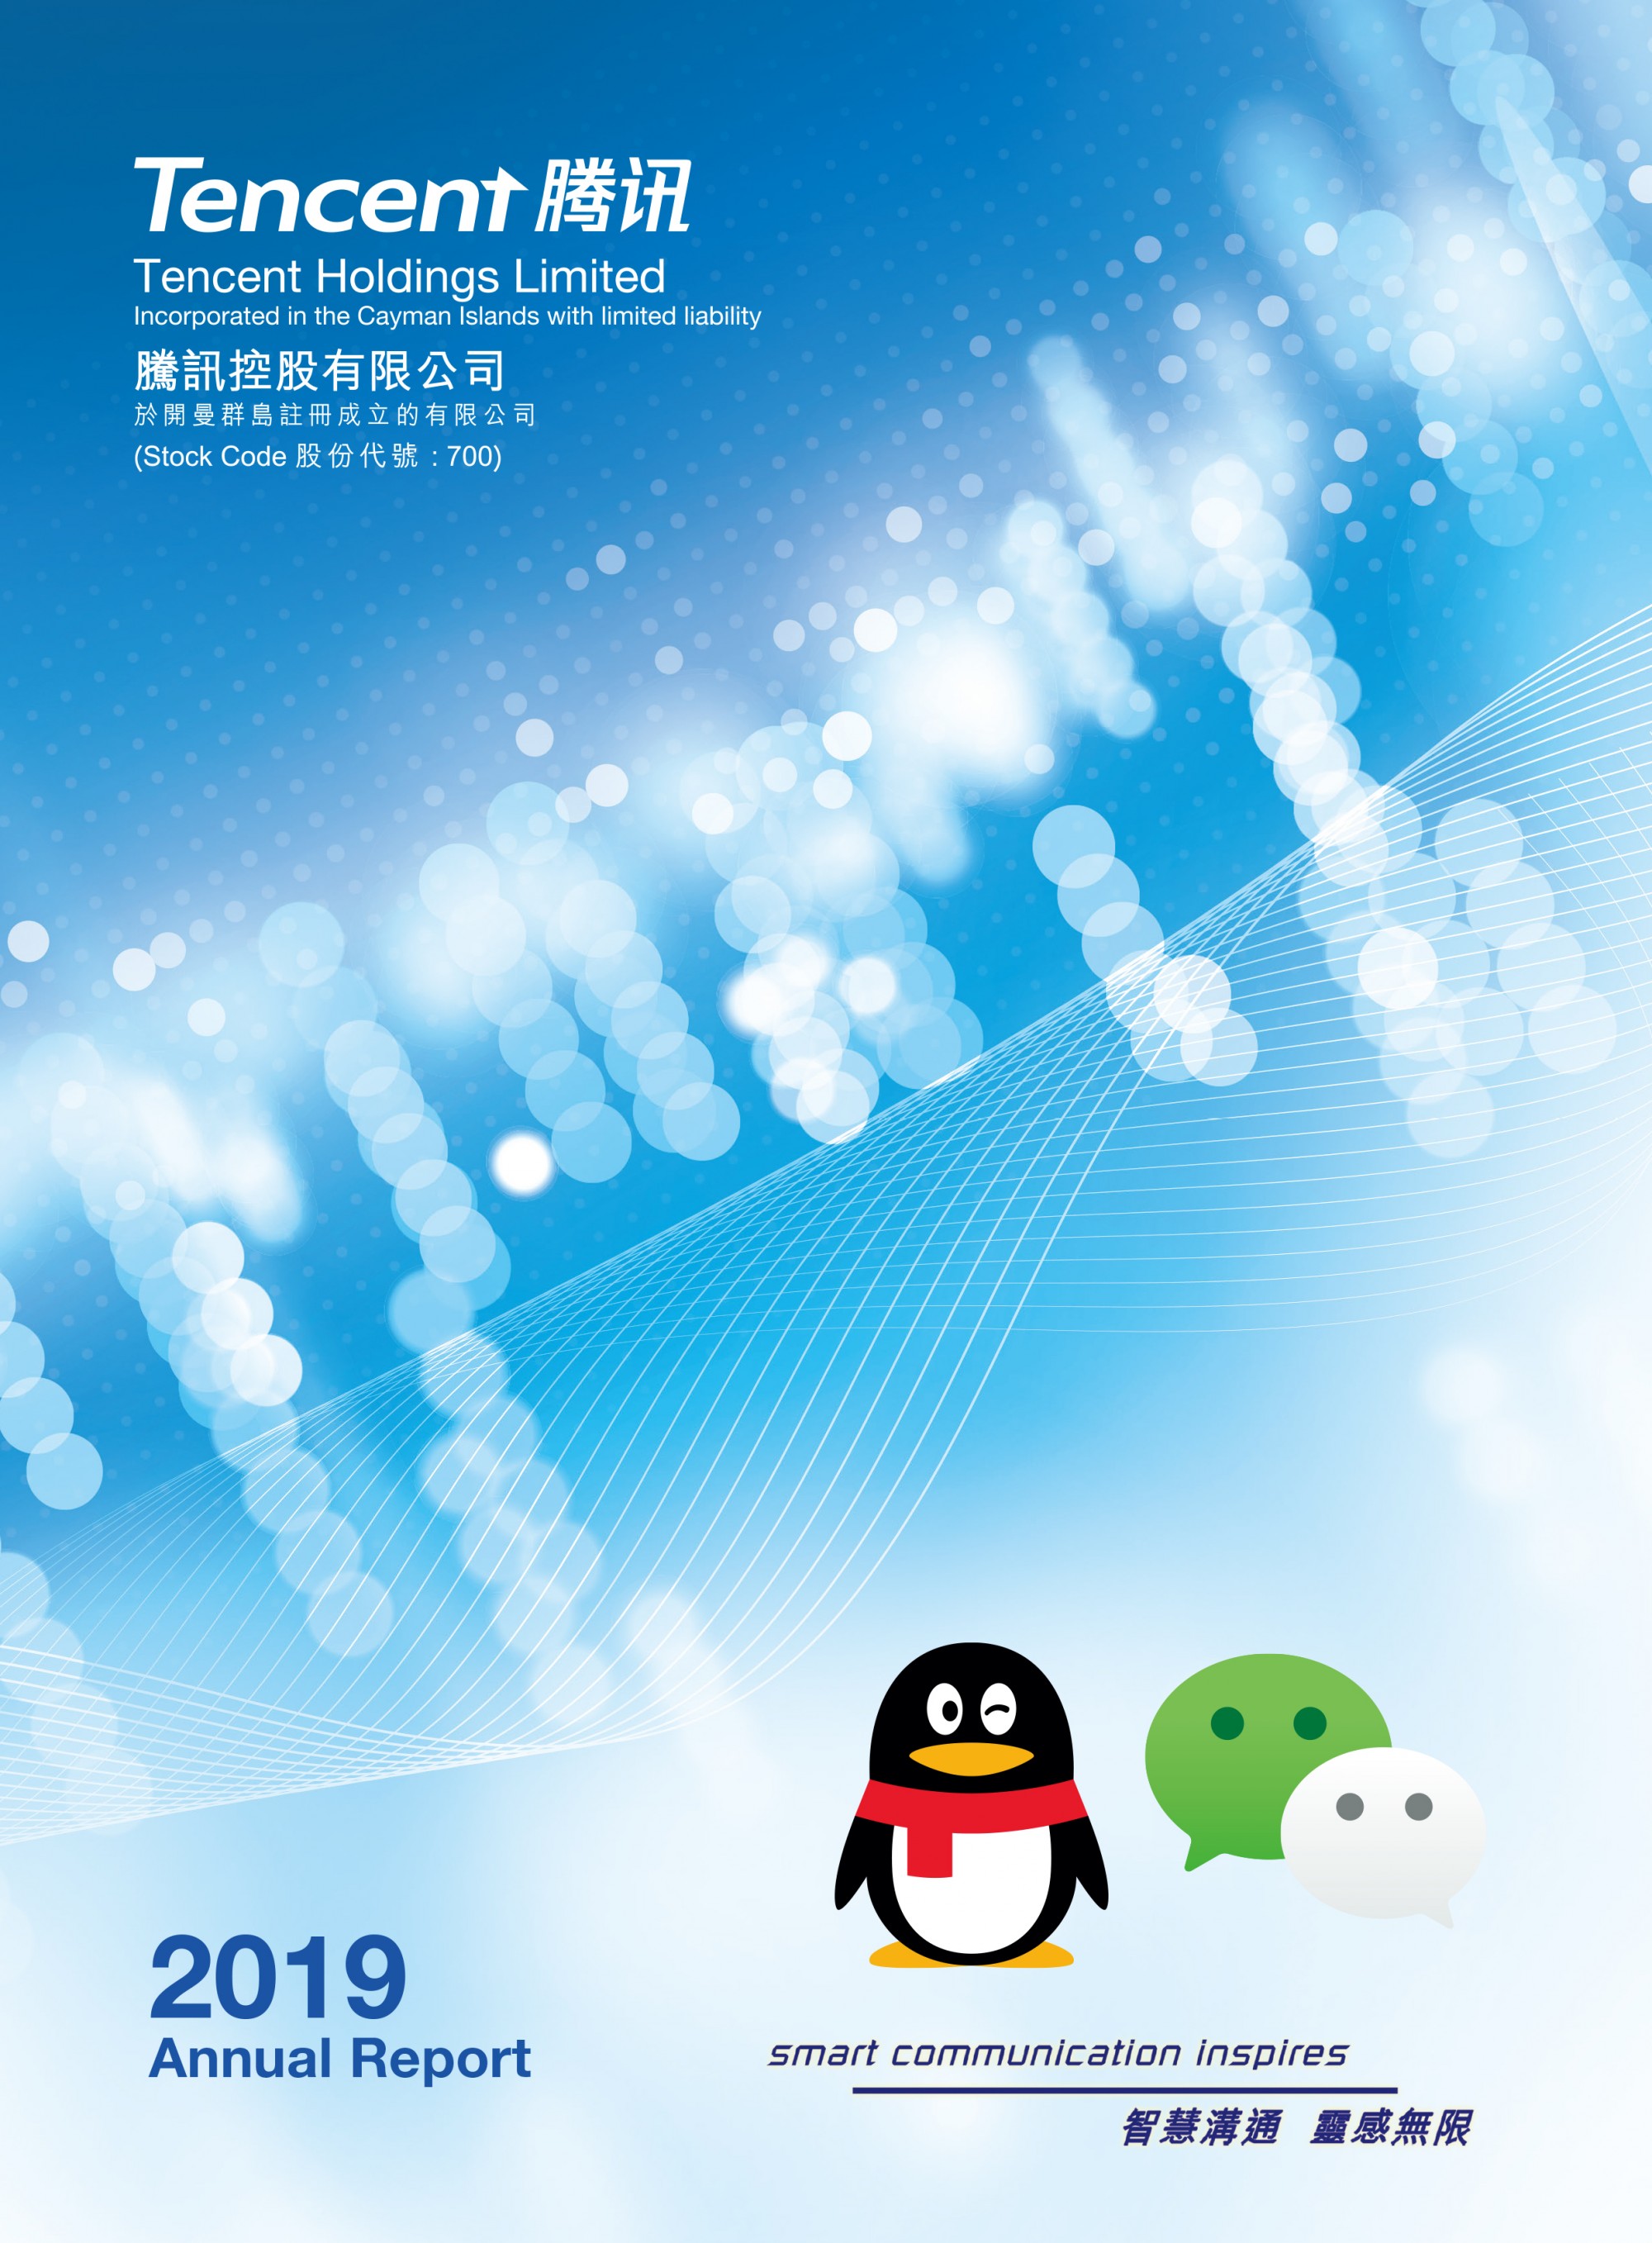 investors tencent 腾讯 industry benchmarks and financial ratios 2019 p&l lines